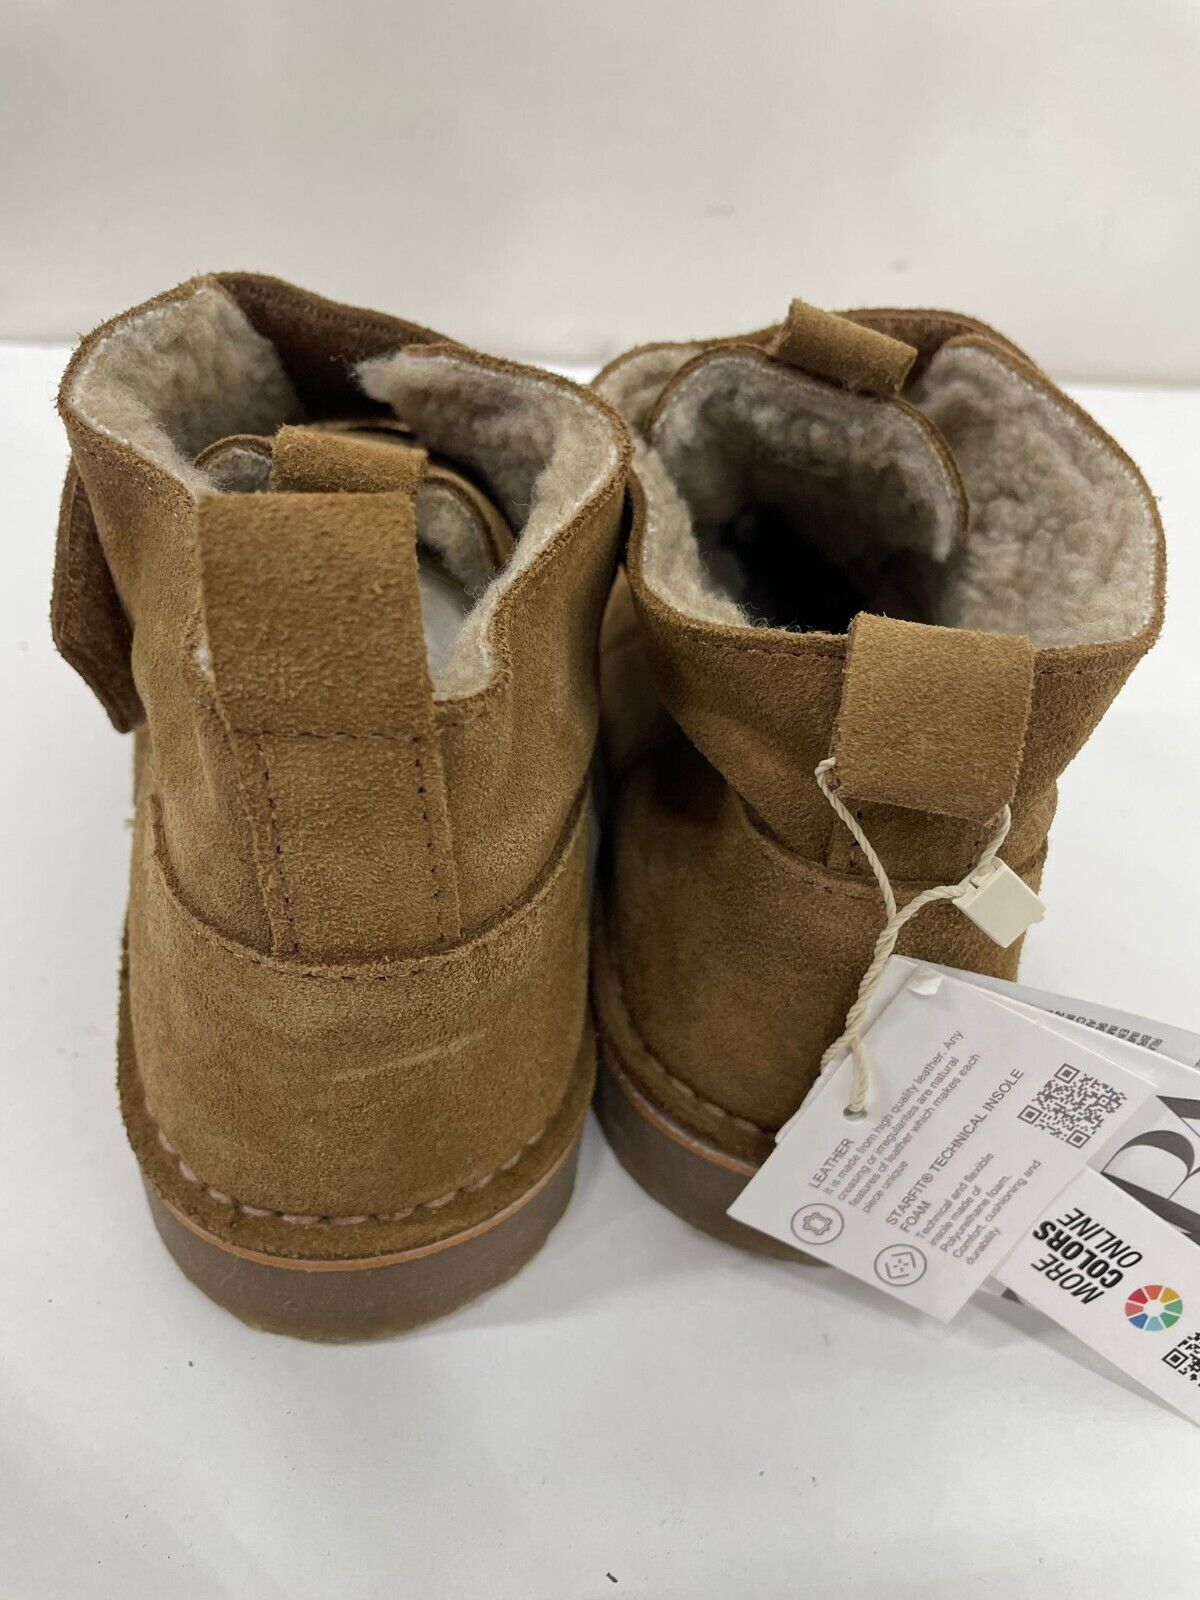 Zara Big Kids 2 Suede Leather Ankle Boots Taupe Hook & Loop Strap 4150/030/131